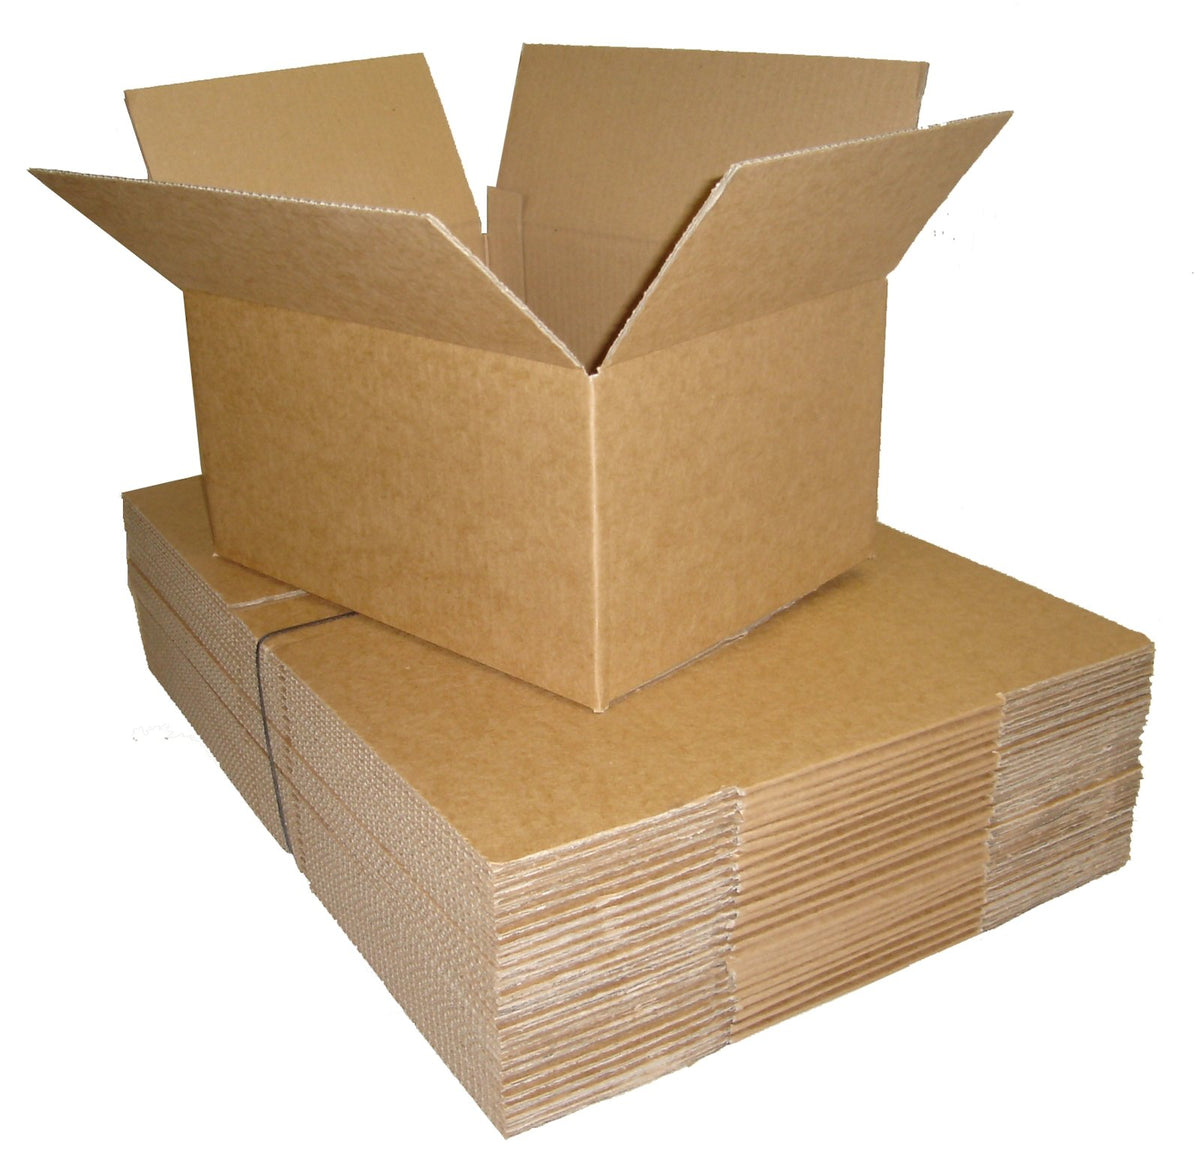 A3 Single walled carton – Wessex Rope and Packaging